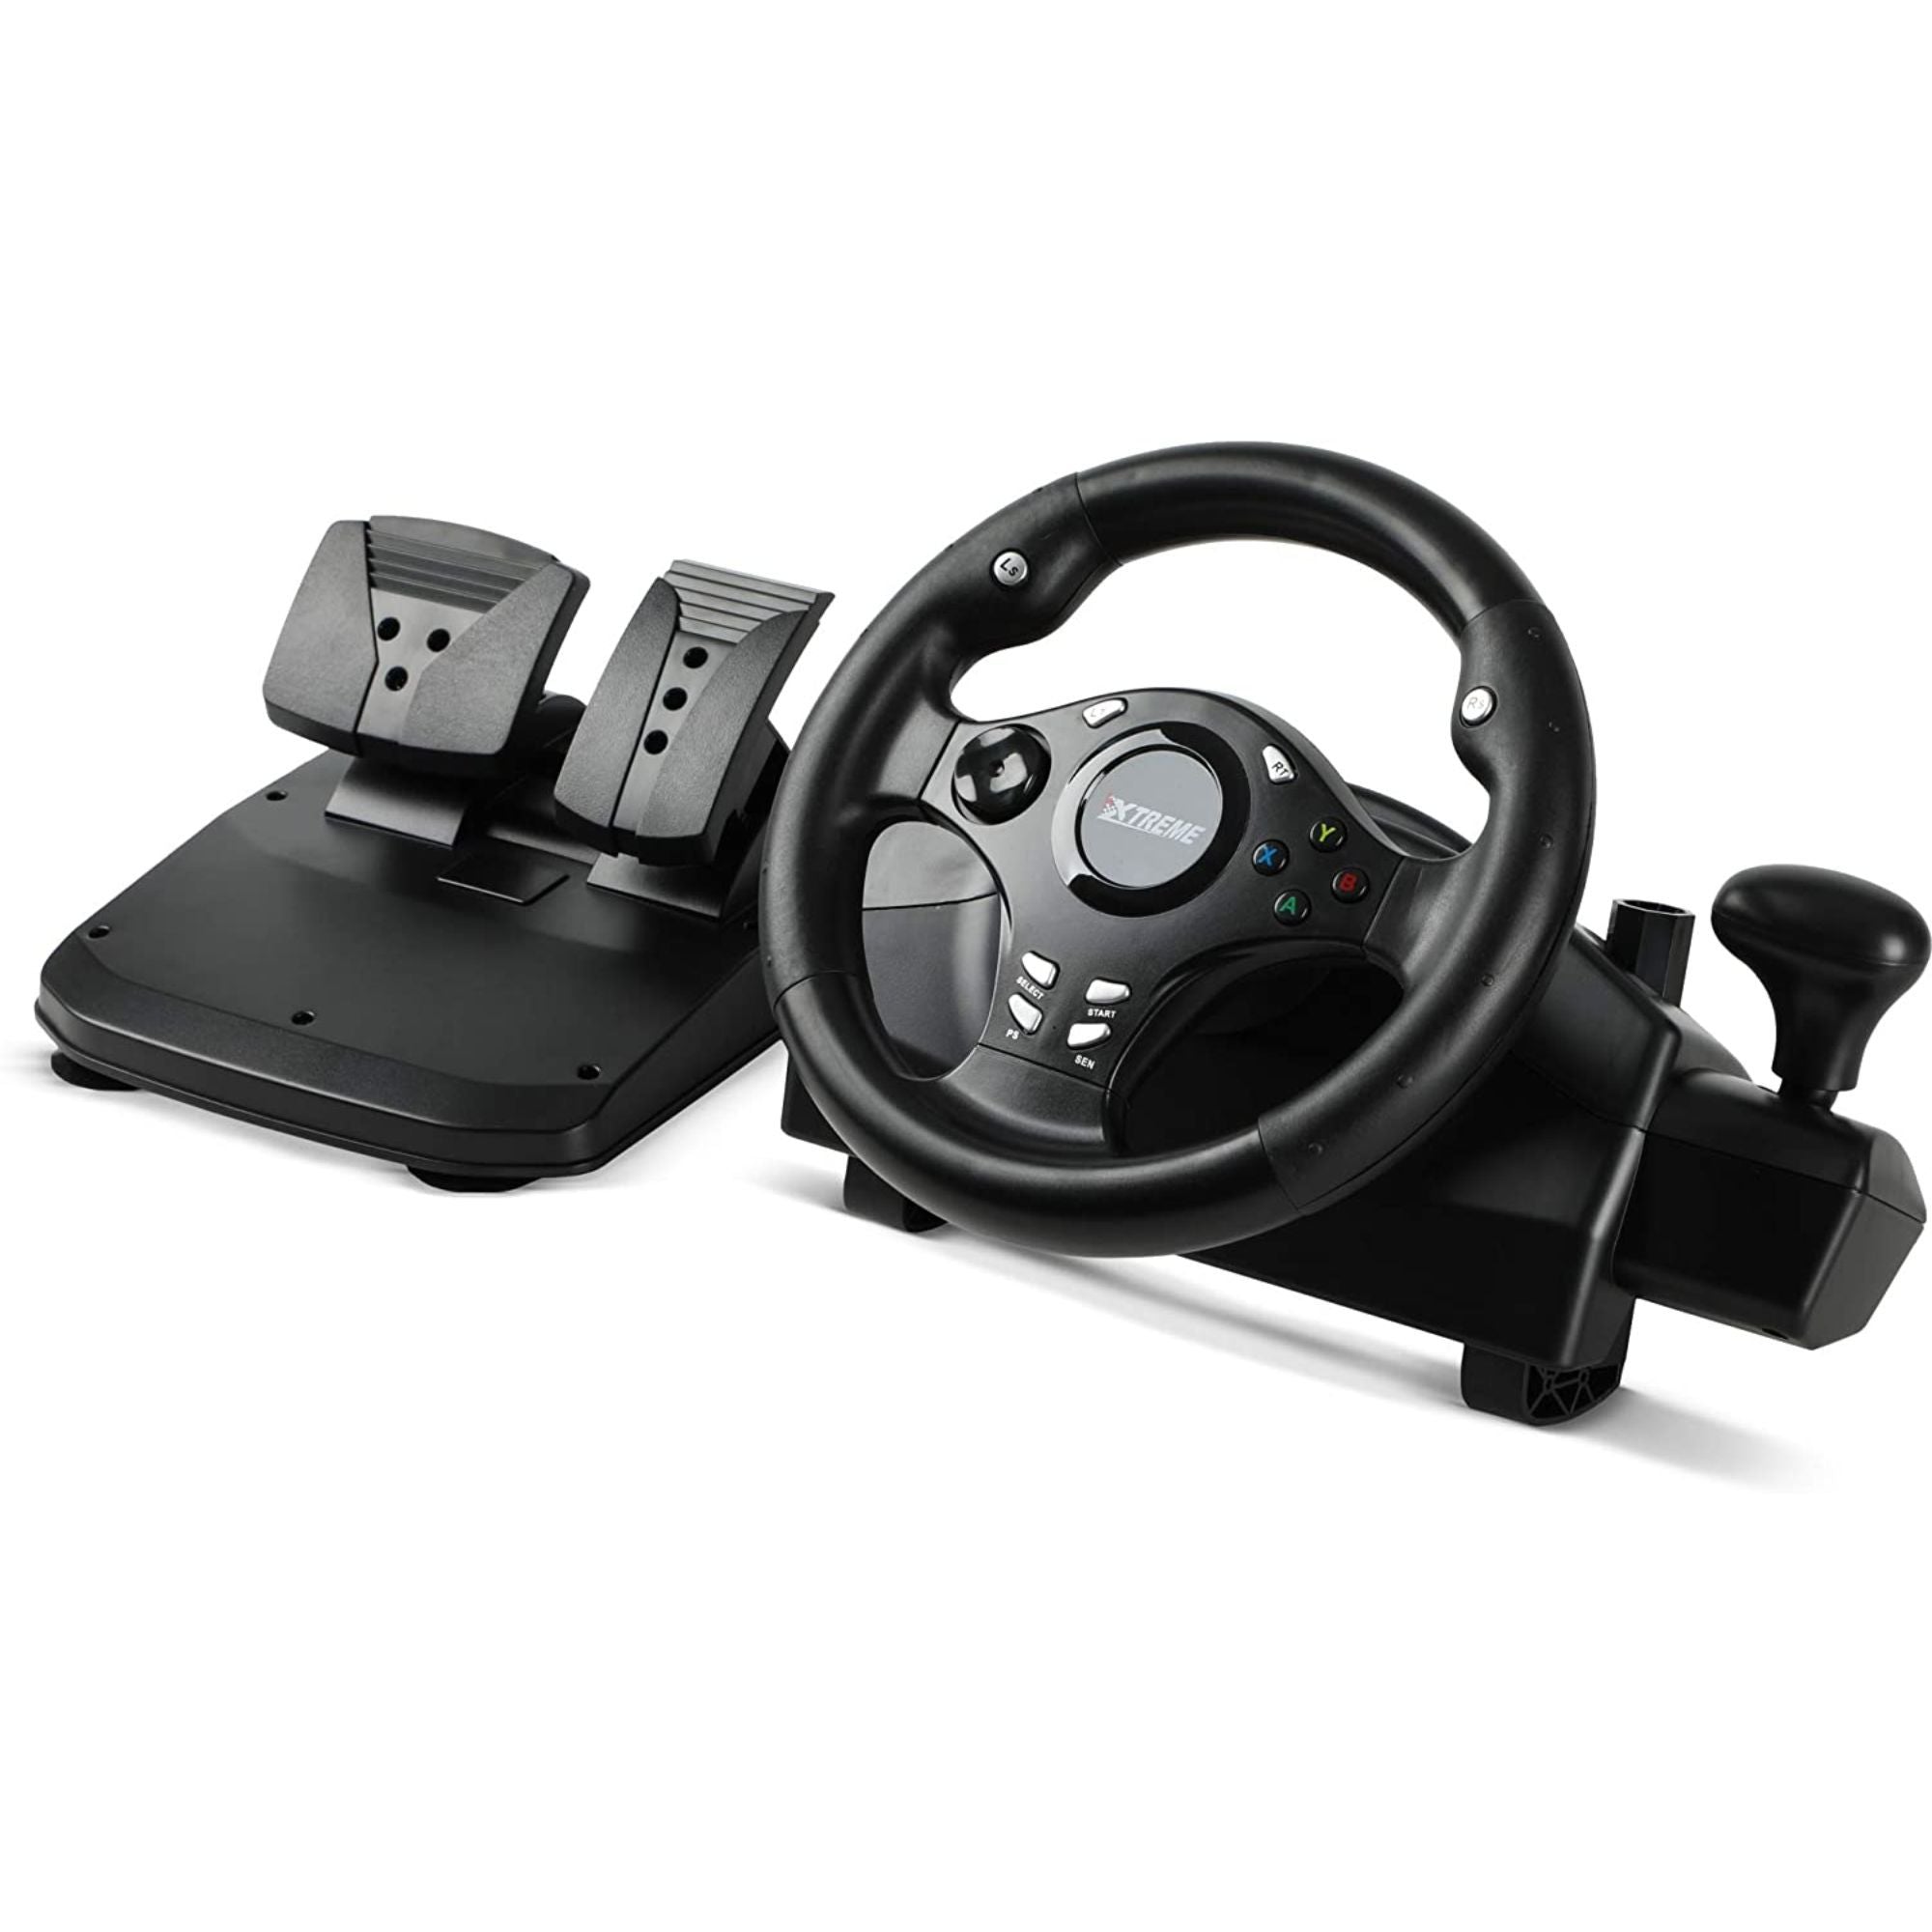 national vrede at tiltrække XTREME Racing Gaming Steering Wheel for PS4, Xbox One, Xbox 360, PC Co –  Packed Direct UK